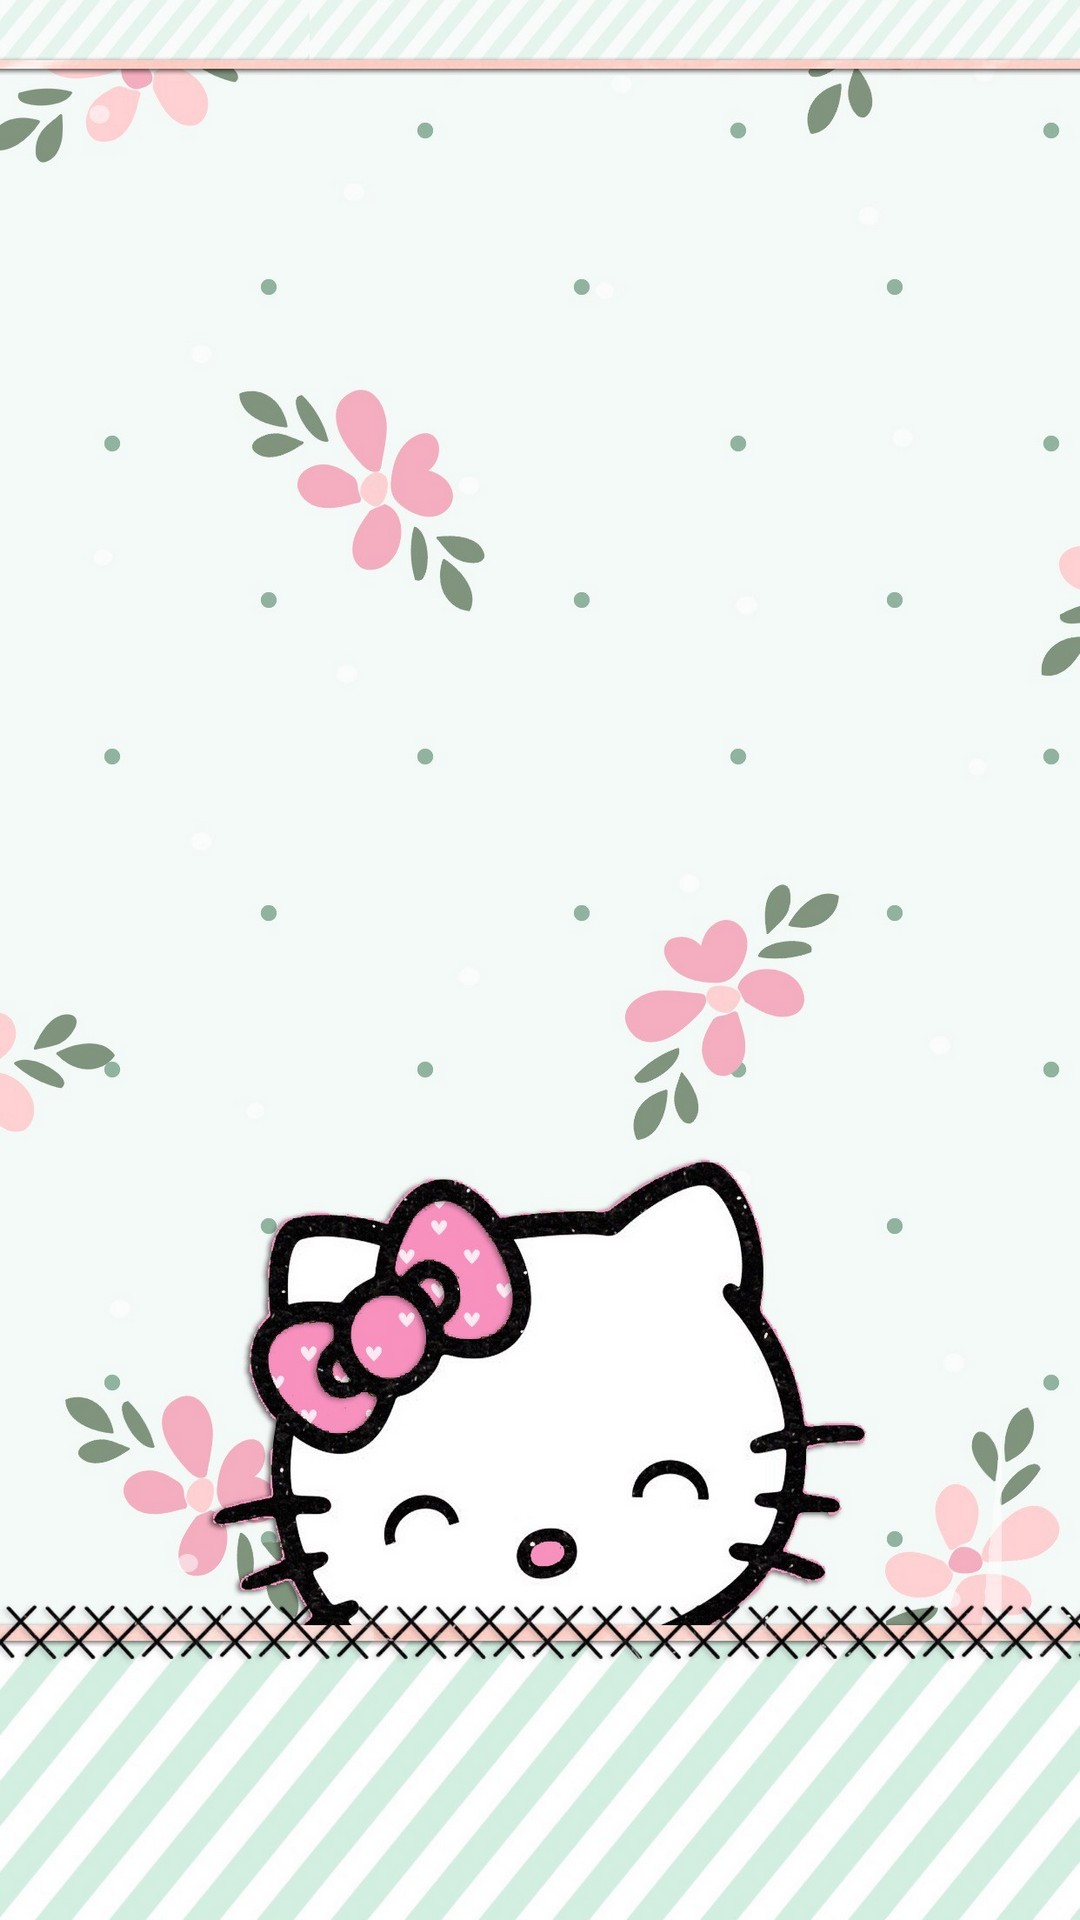 Kitty iPhone X Wallpaper with image resolution 1080x1920 pixel. You can use this wallpaper as background for your desktop Computer Screensavers, Android or iPhone smartphones